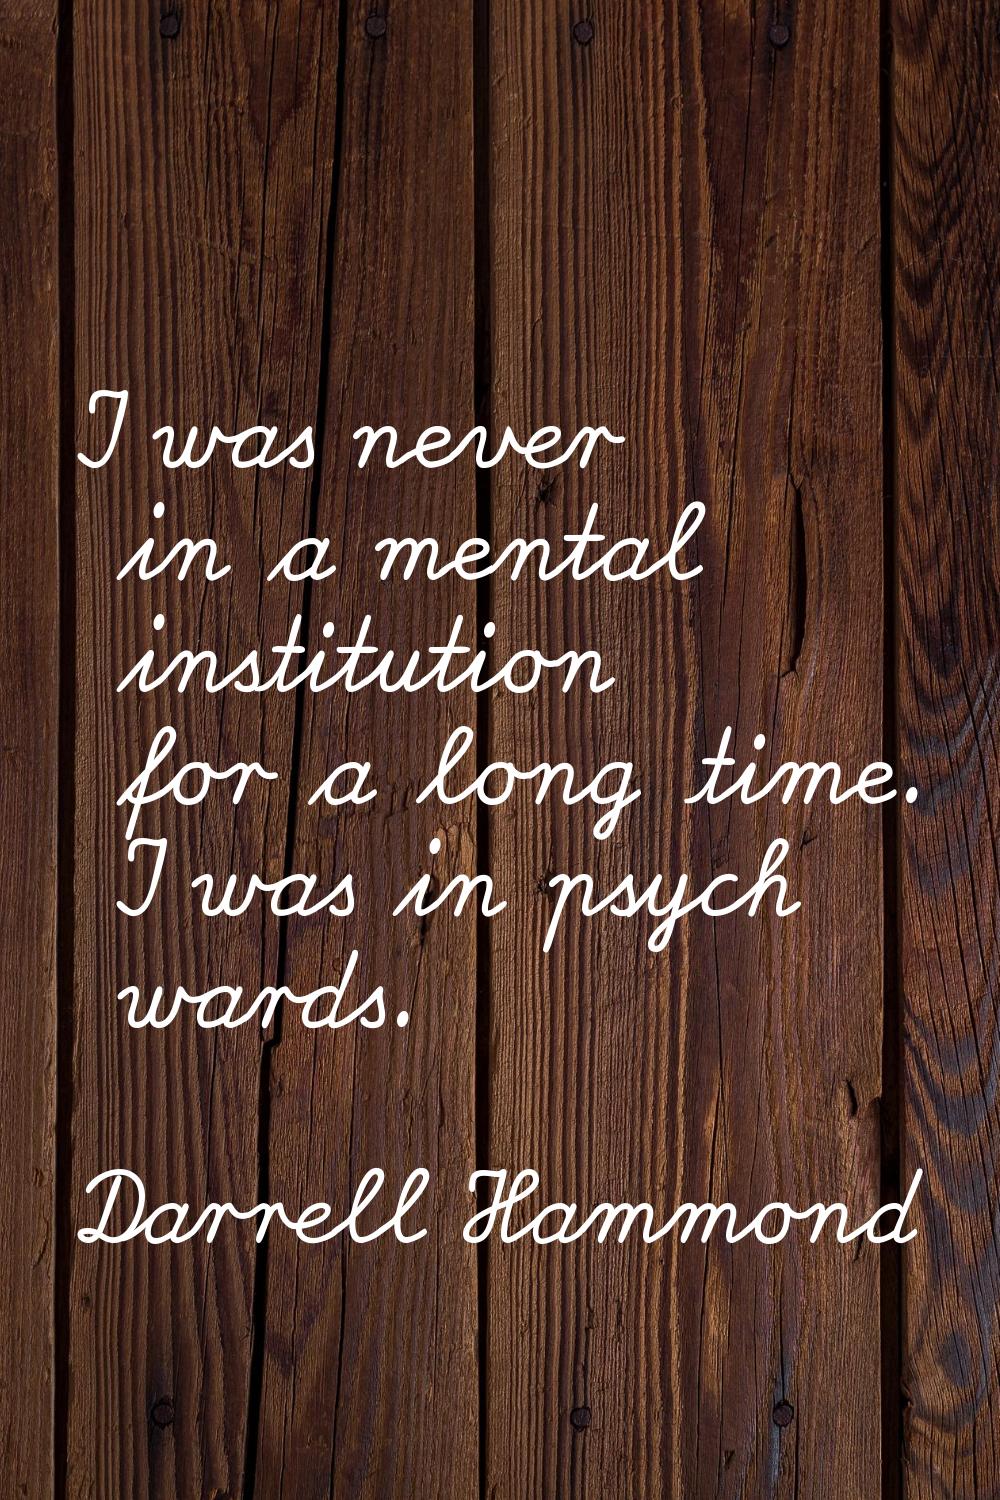 I was never in a mental institution for a long time. I was in psych wards.